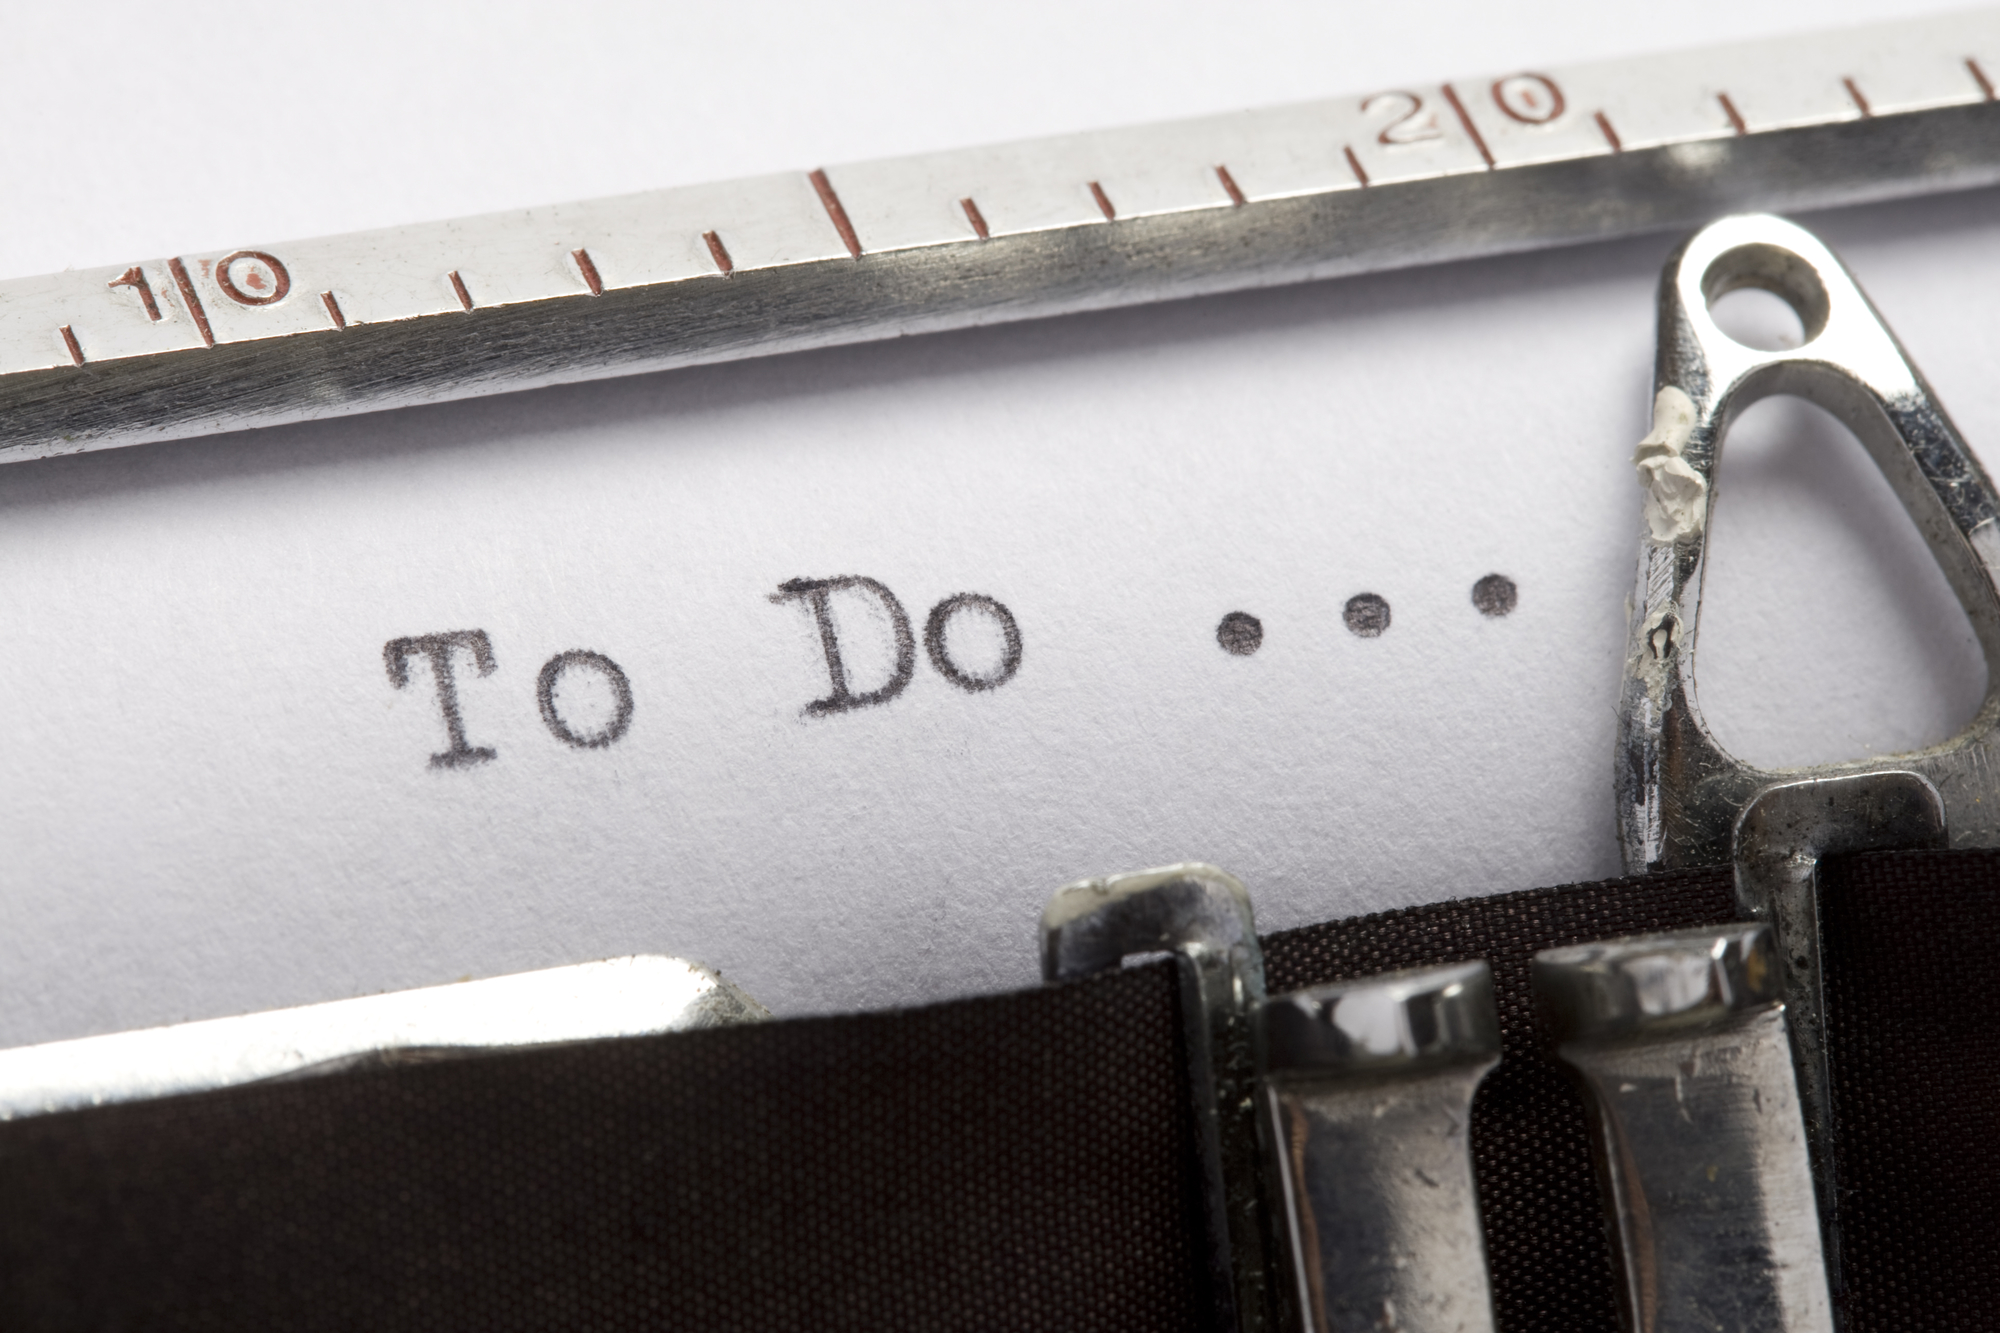 Held Captive By Your To Do List – 3 Tips to FREE Yourself.